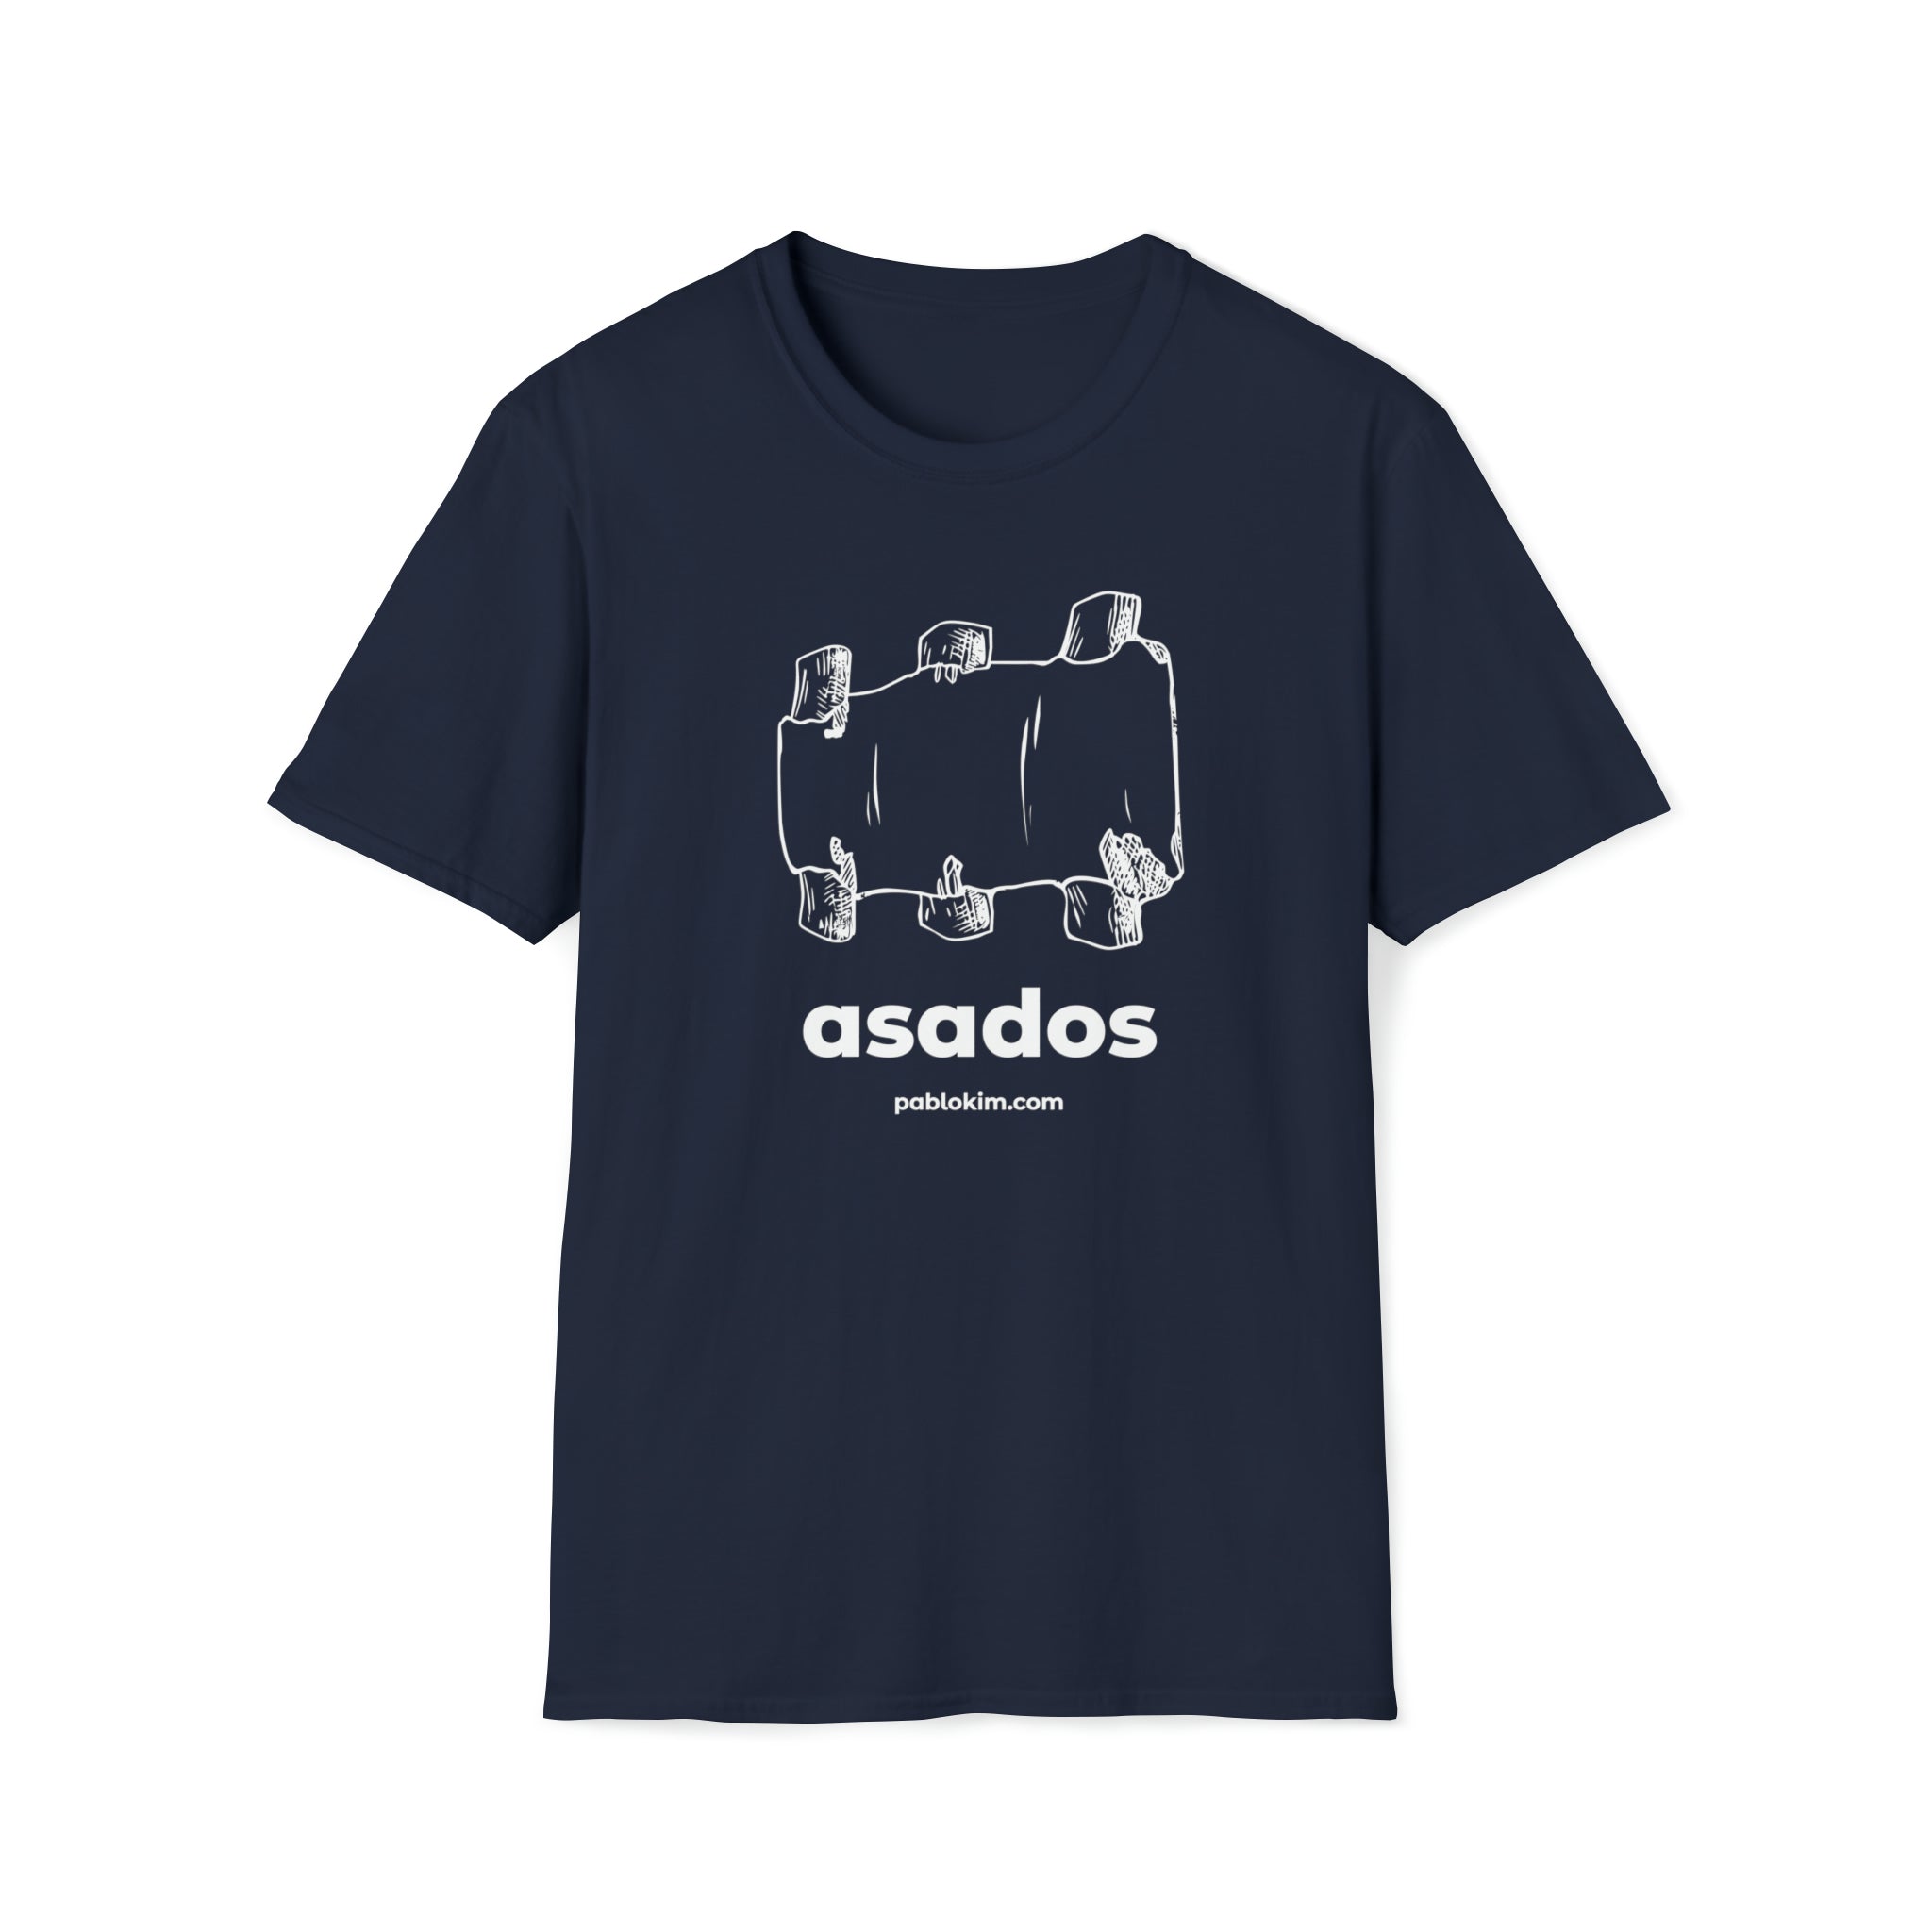 Asados - Unisex Softstyle T-Shirt